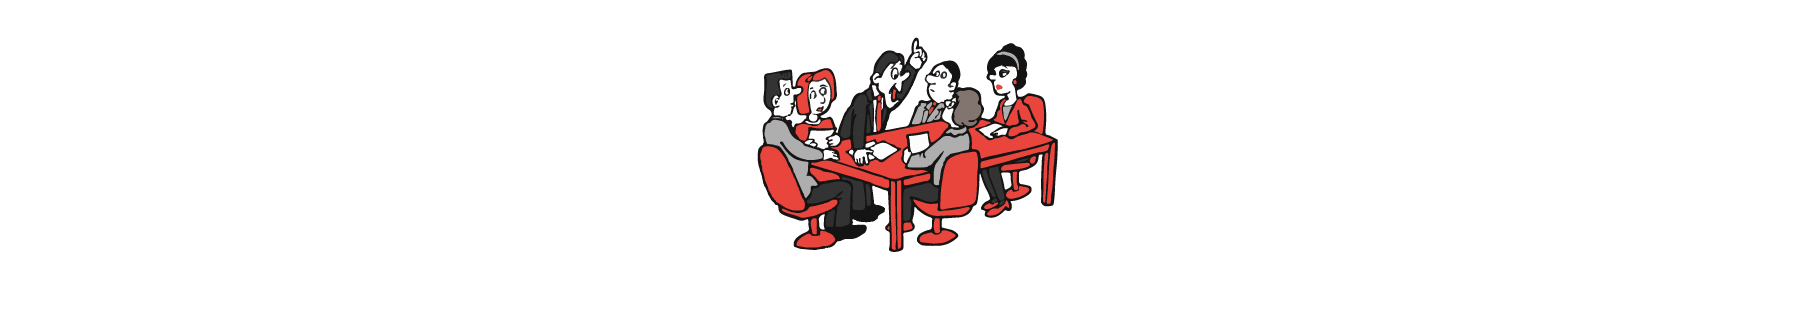 group clipart focus group